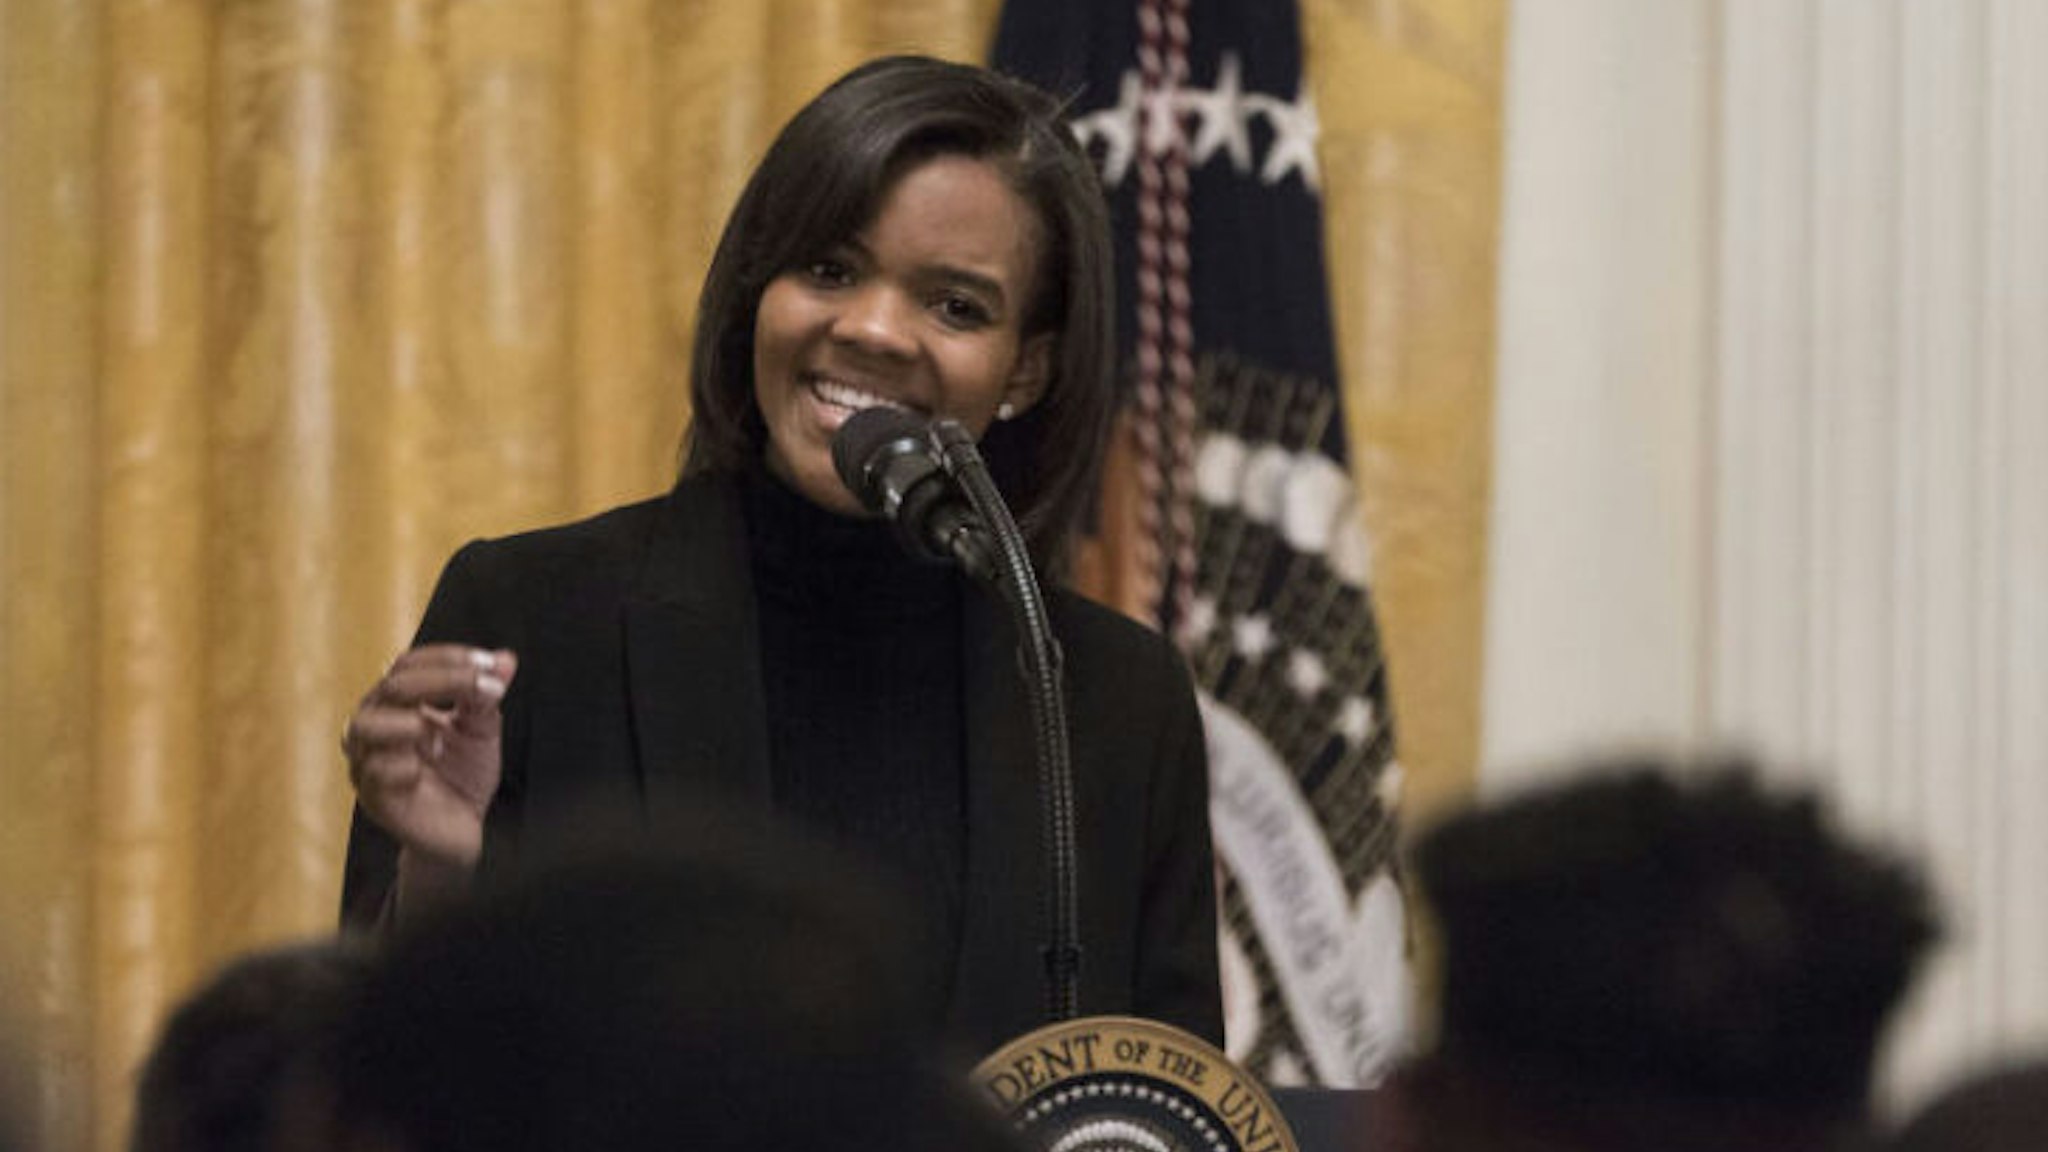 Political commentator Candace Owens introduces U.S. President Donald Trump, not pictured, during the Young Black Leadership Summit 2019 event in the East Room of the White House in Washington, D.C., U.S., on Friday, Oct. 4, 2019. Two outside groups that support Trump have raised $6.9 million since House Democrats announced their impeachment inquiry last week. Photographer: Sarah Silbiger/Bloomberg